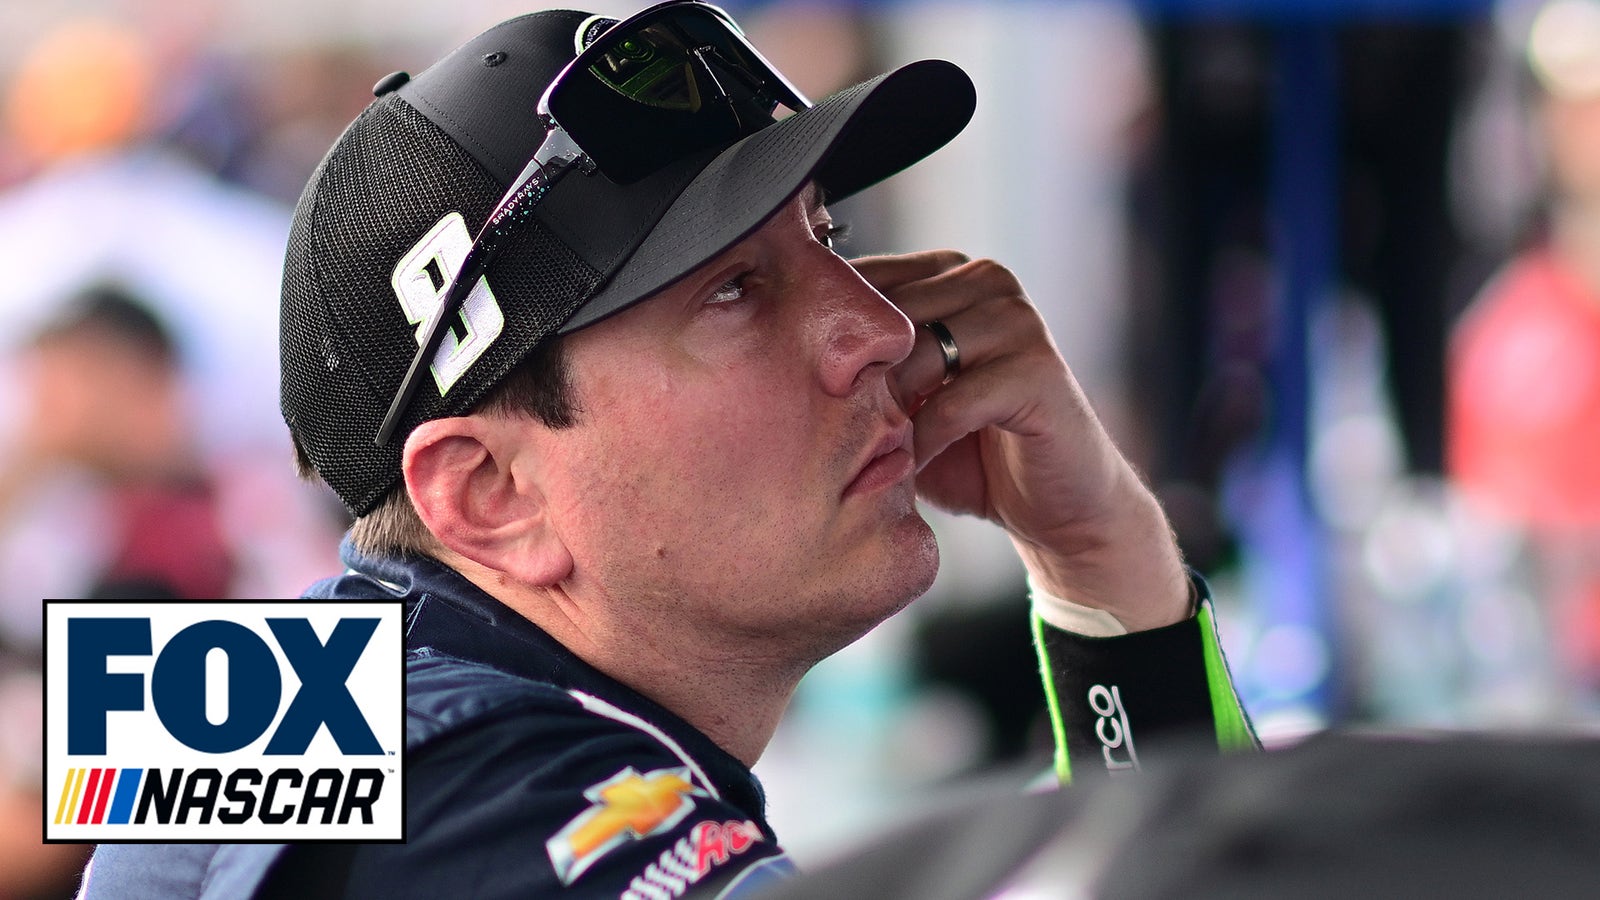 'It's been tough' – Kyle Busch on not winning in more than a year